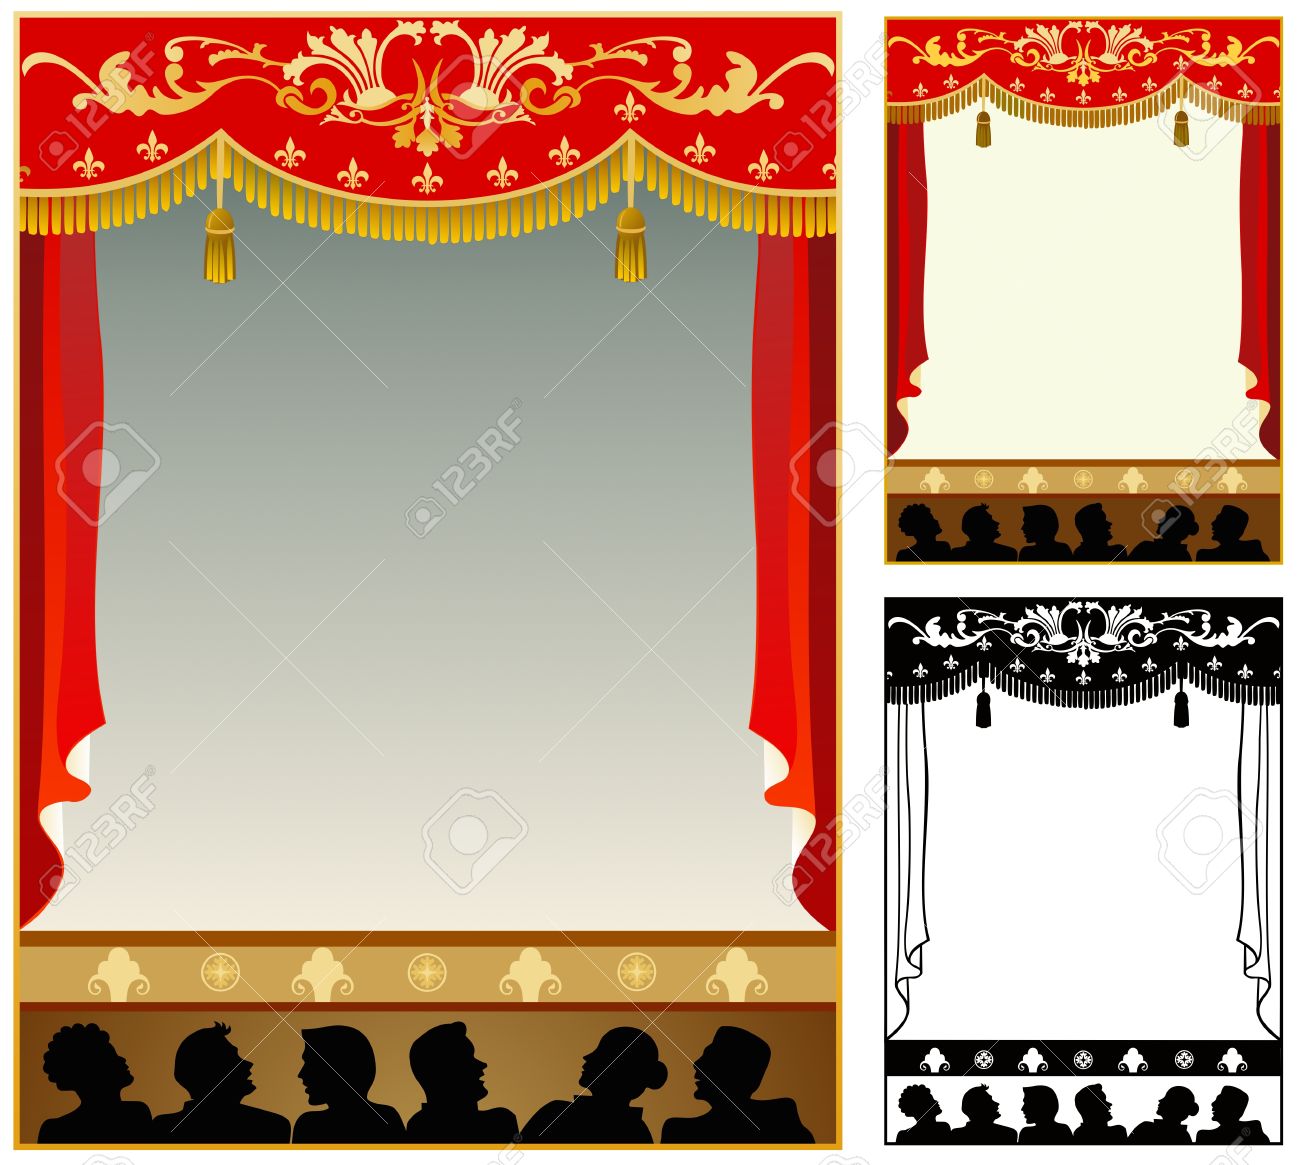 Pinart illustration of an. Audience clipart crowded room